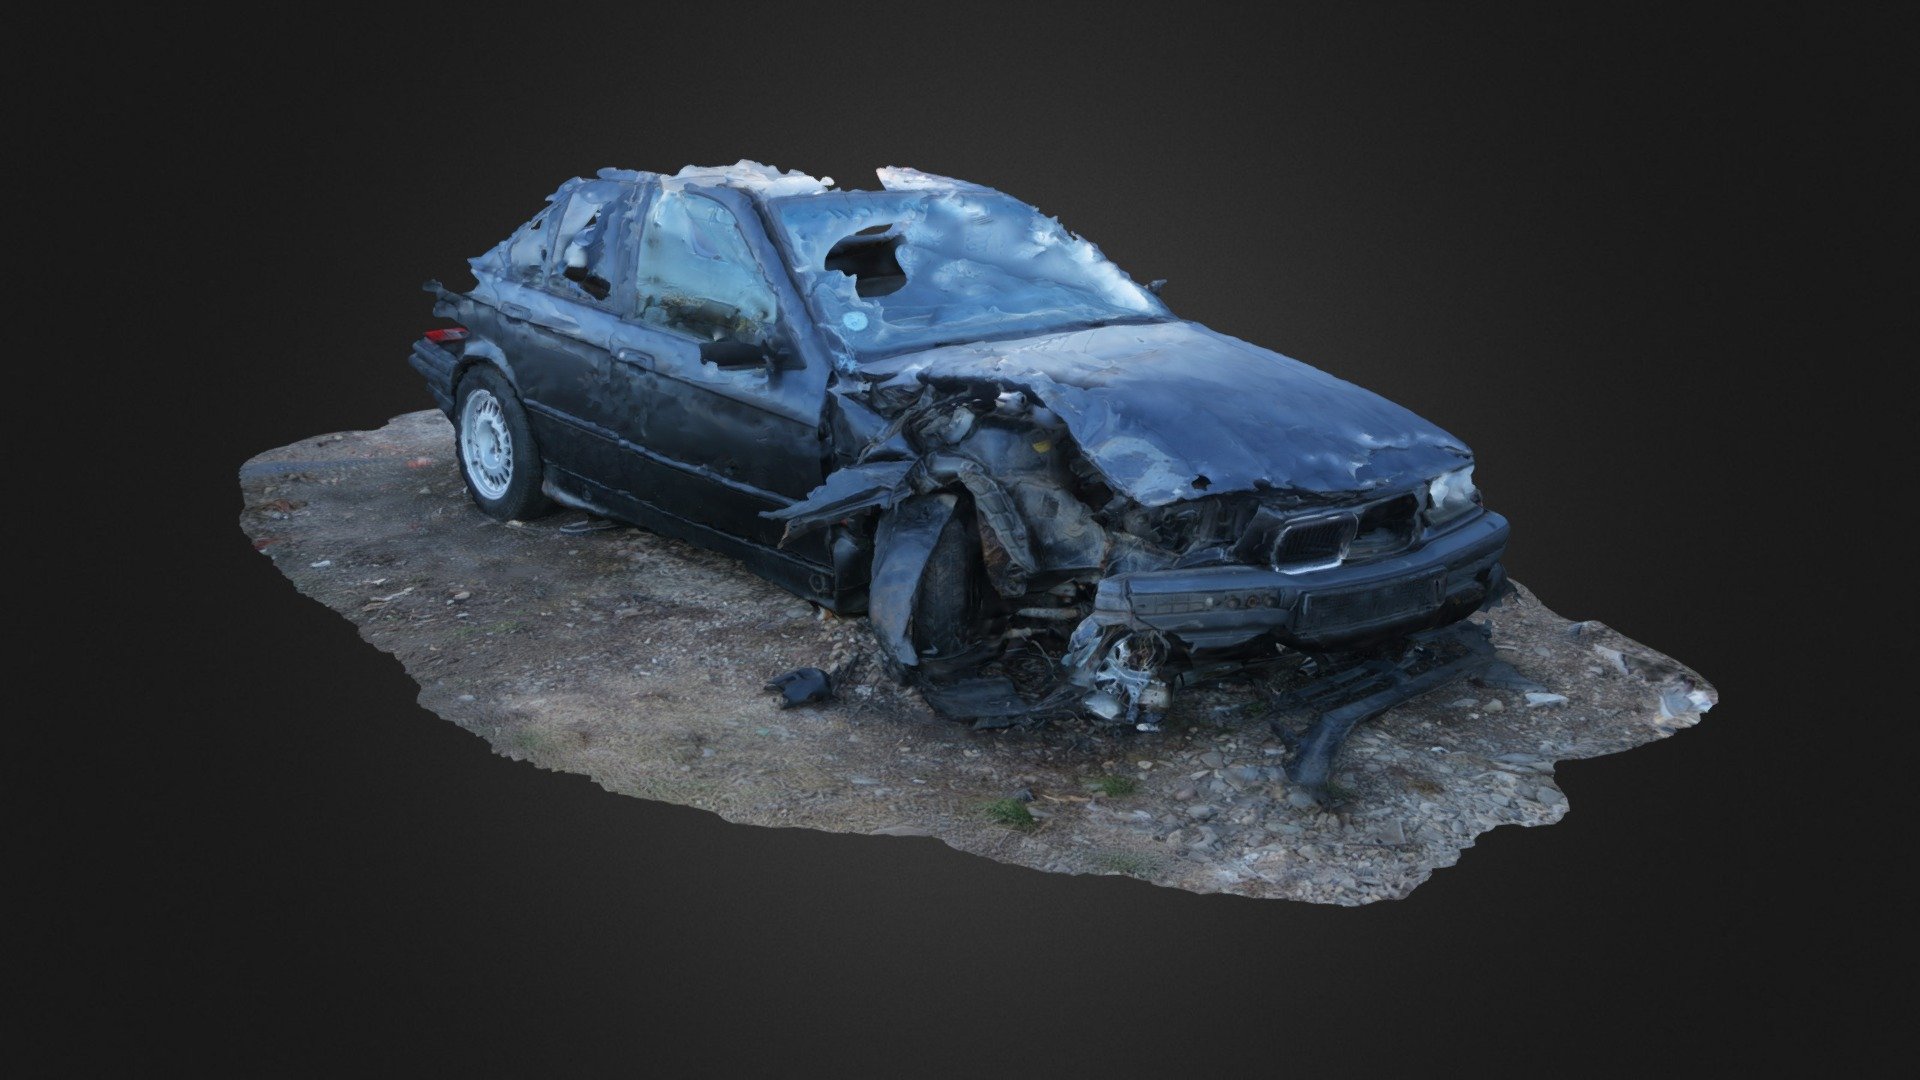 This unlucky BMW Series 3 E36 car, actually suffered two accidents. Besides the nasty, physical road traffic collision, the photogrammetric alignment produced a poor virtual result due to the high reflectiveness of the vehicle's body and windows 3d model